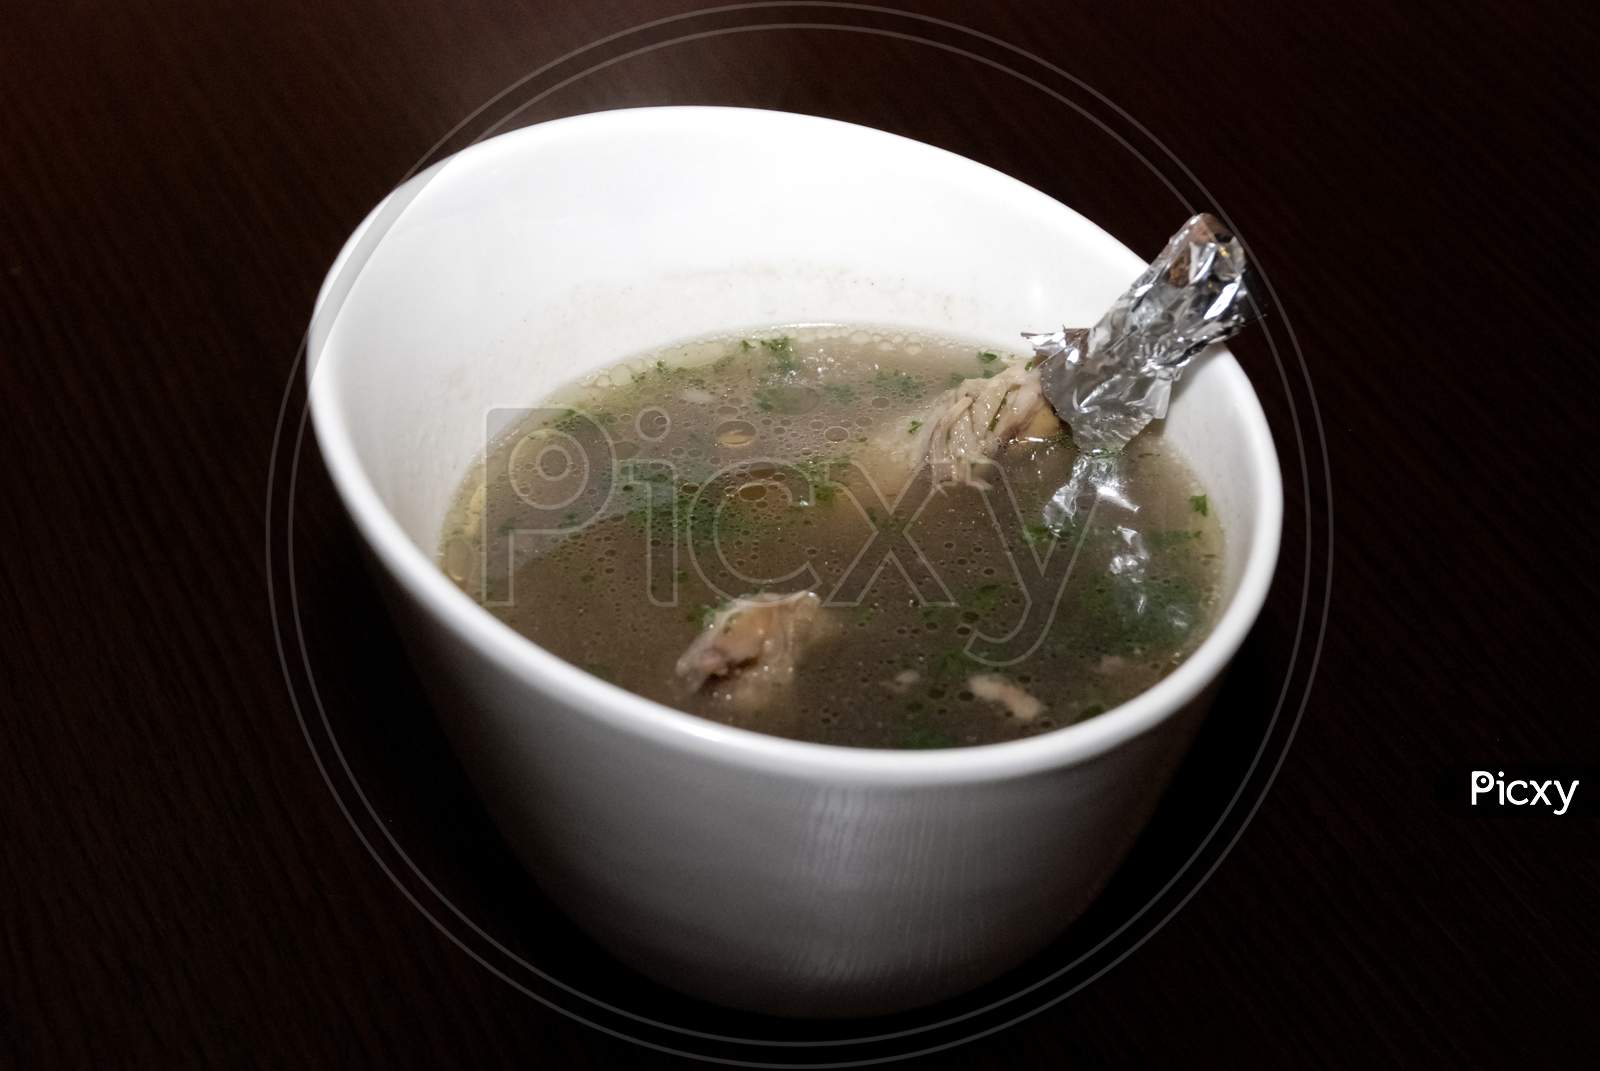 Ribs With Meat In The Broth With Some Herbs Served In The White Bowl